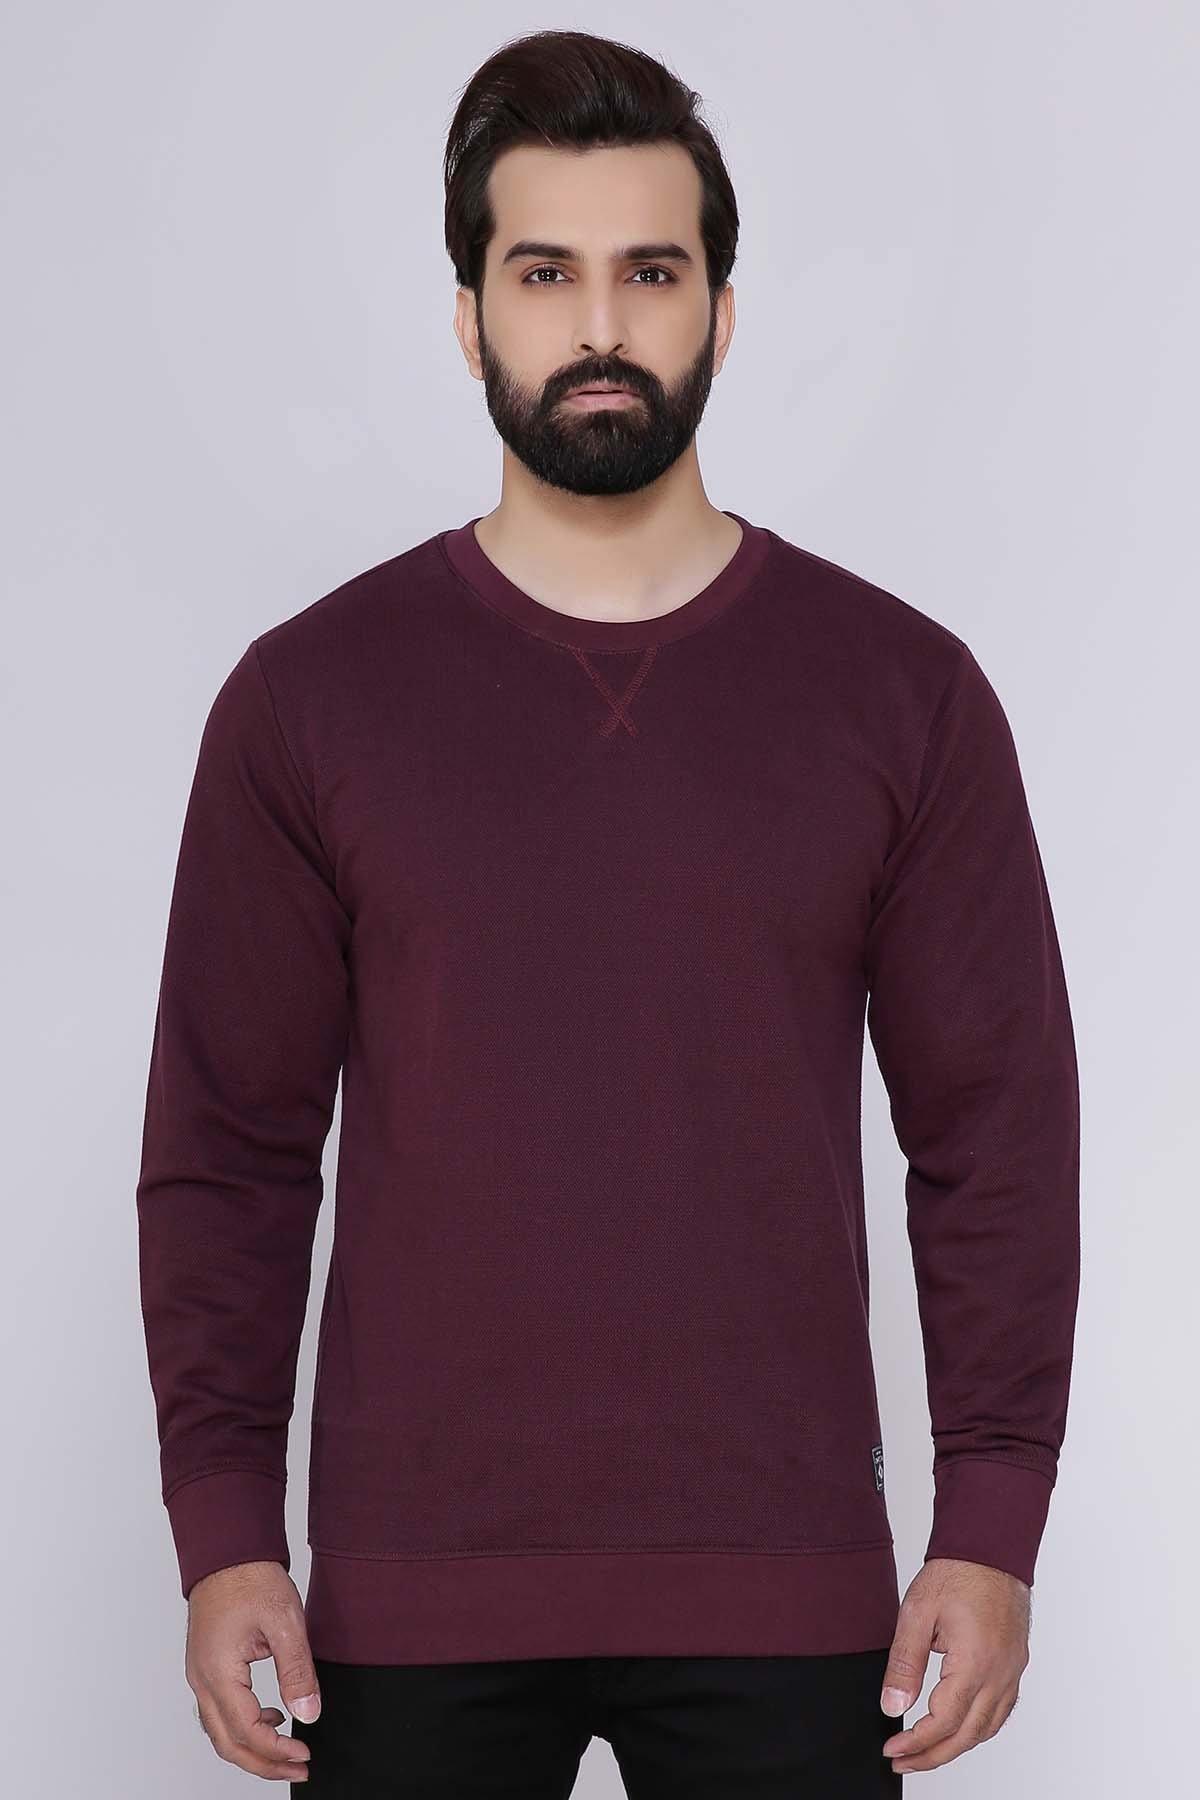 PIQUE TERRY SWEAT SHIRT MAROON at Charcoal Clothing